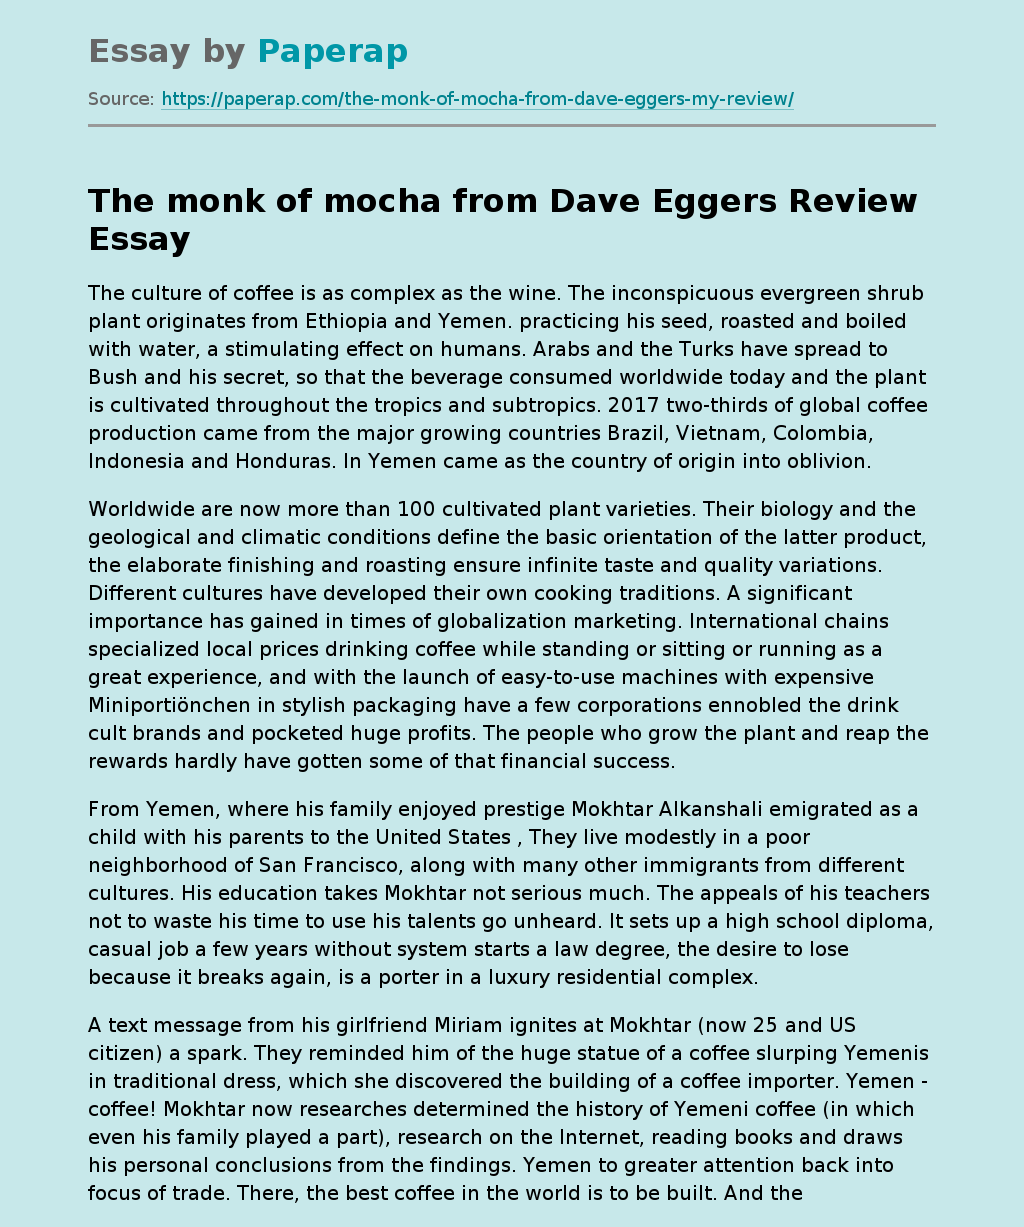 The monk of mocha from Dave Eggers Review